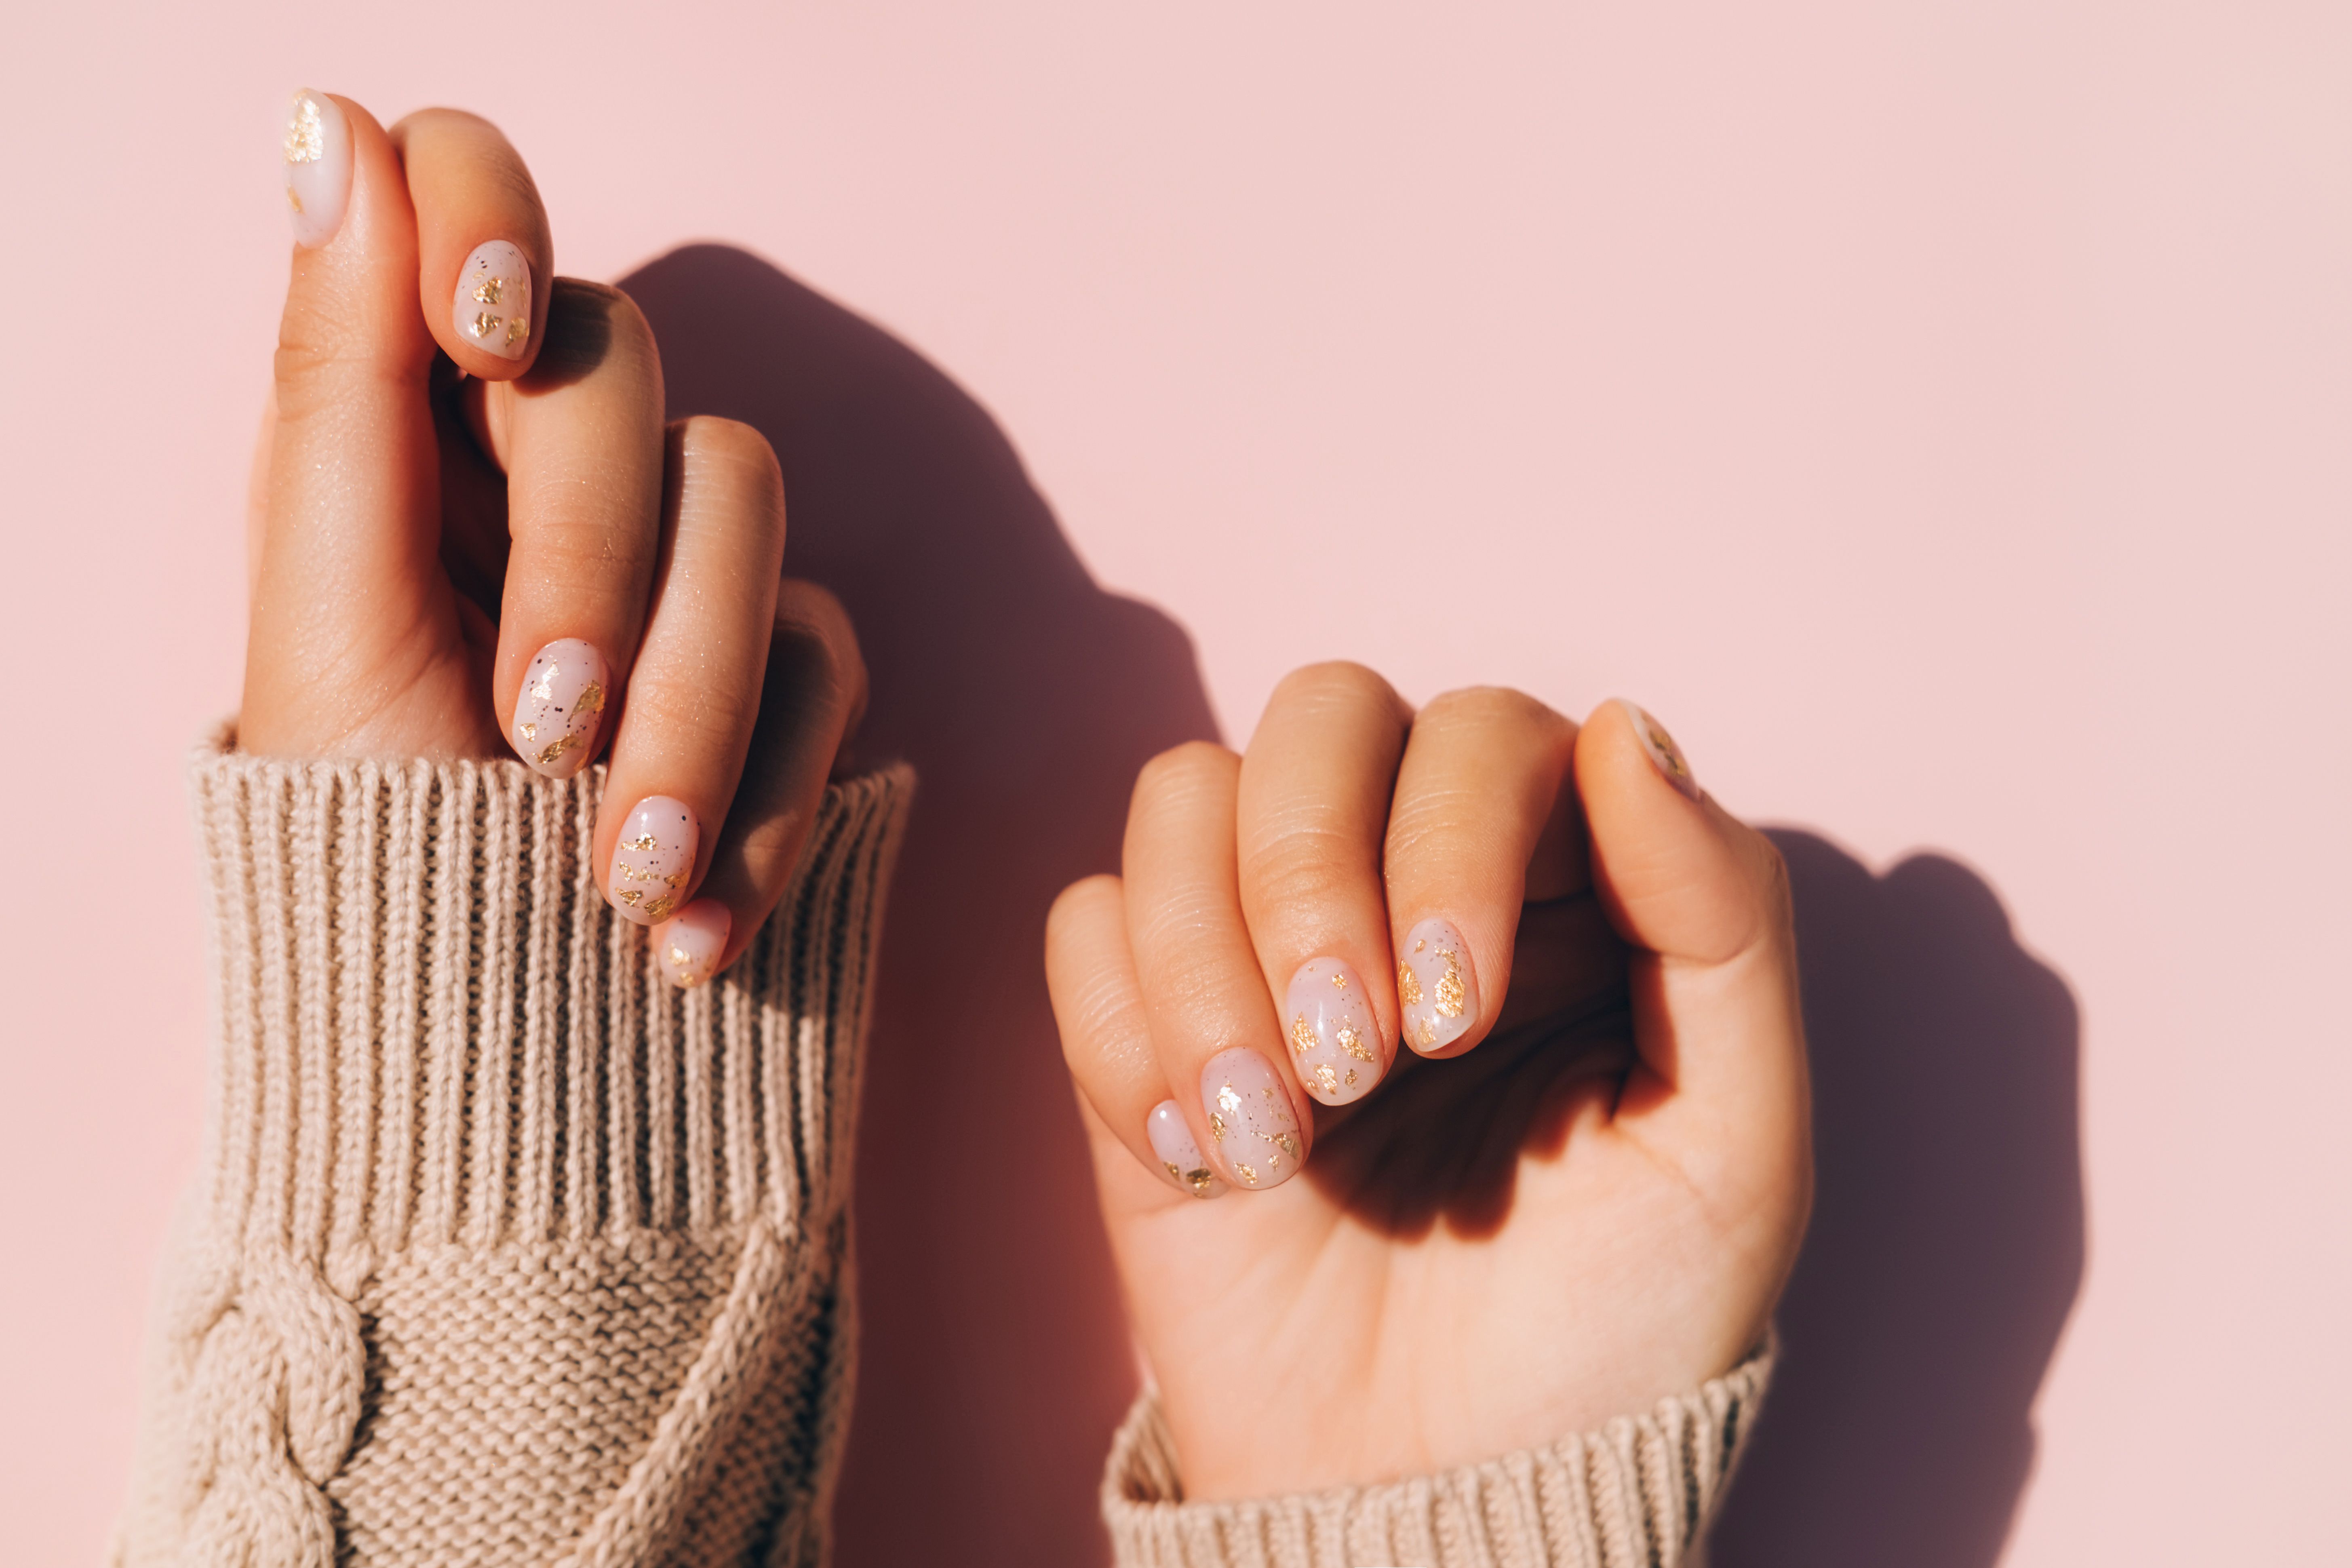 How to Make Nails Dry Faster